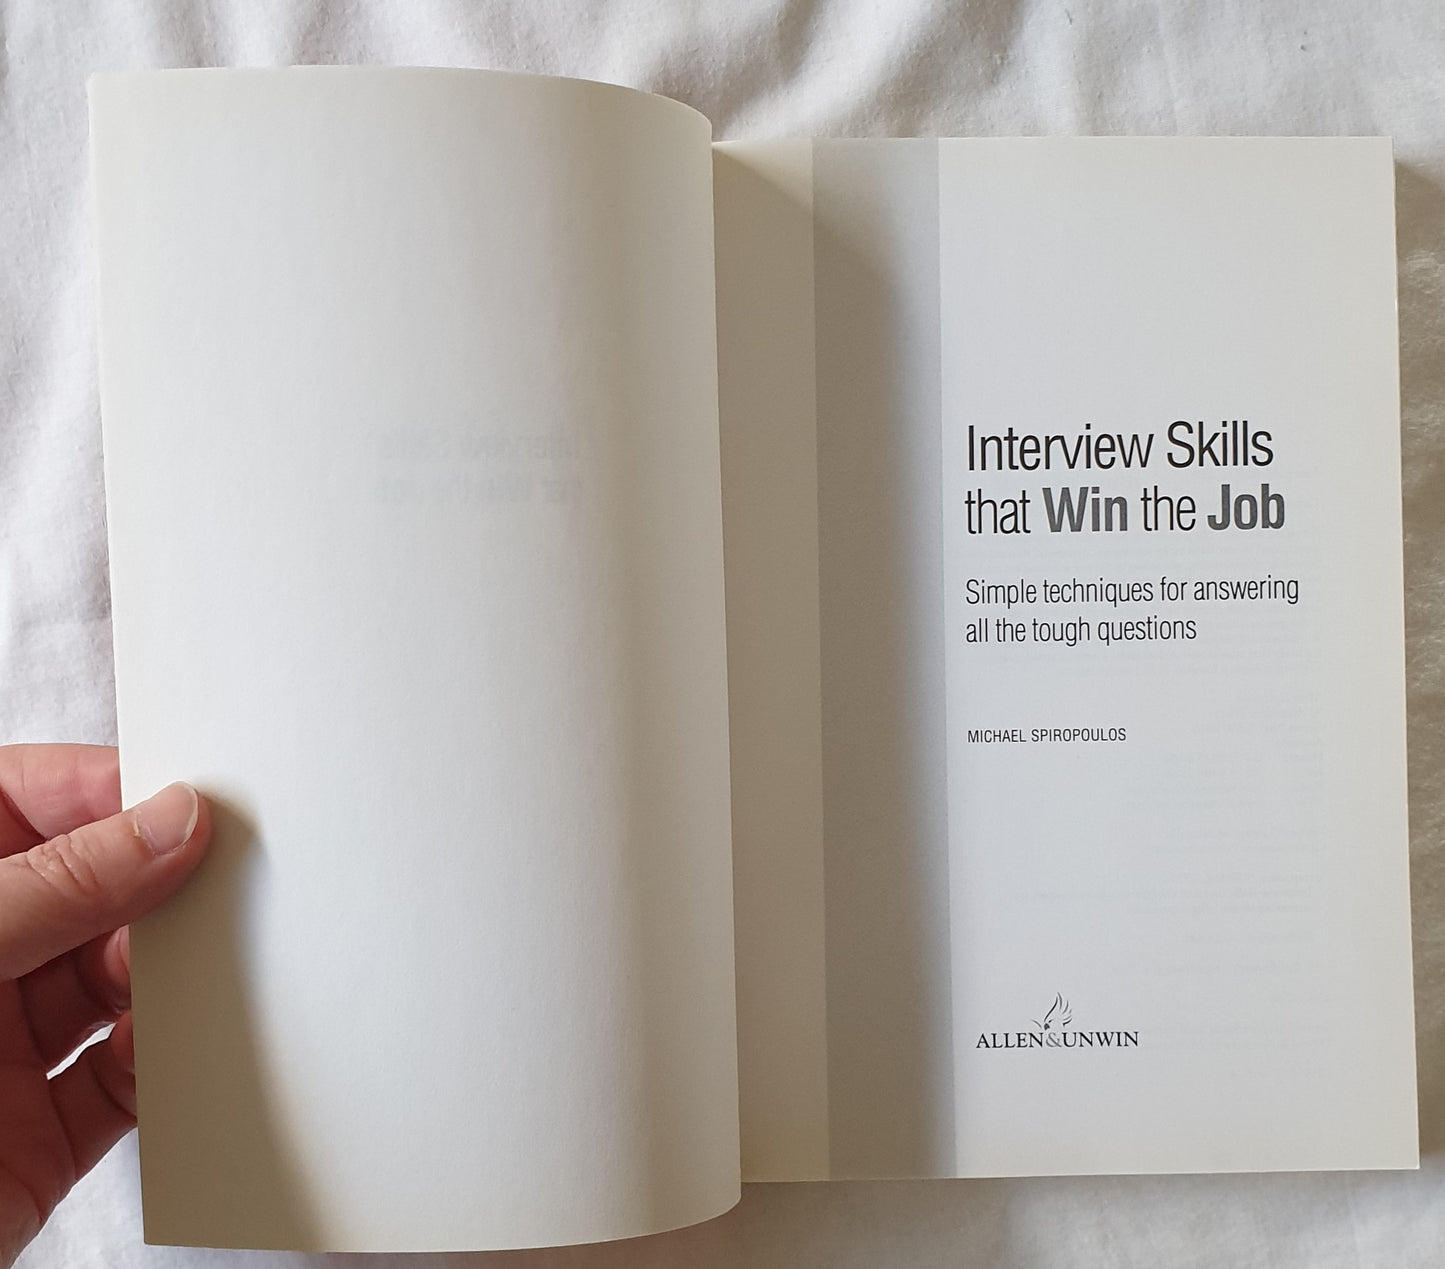 Interview Skills that Win the Job by Michael Spiropoulos